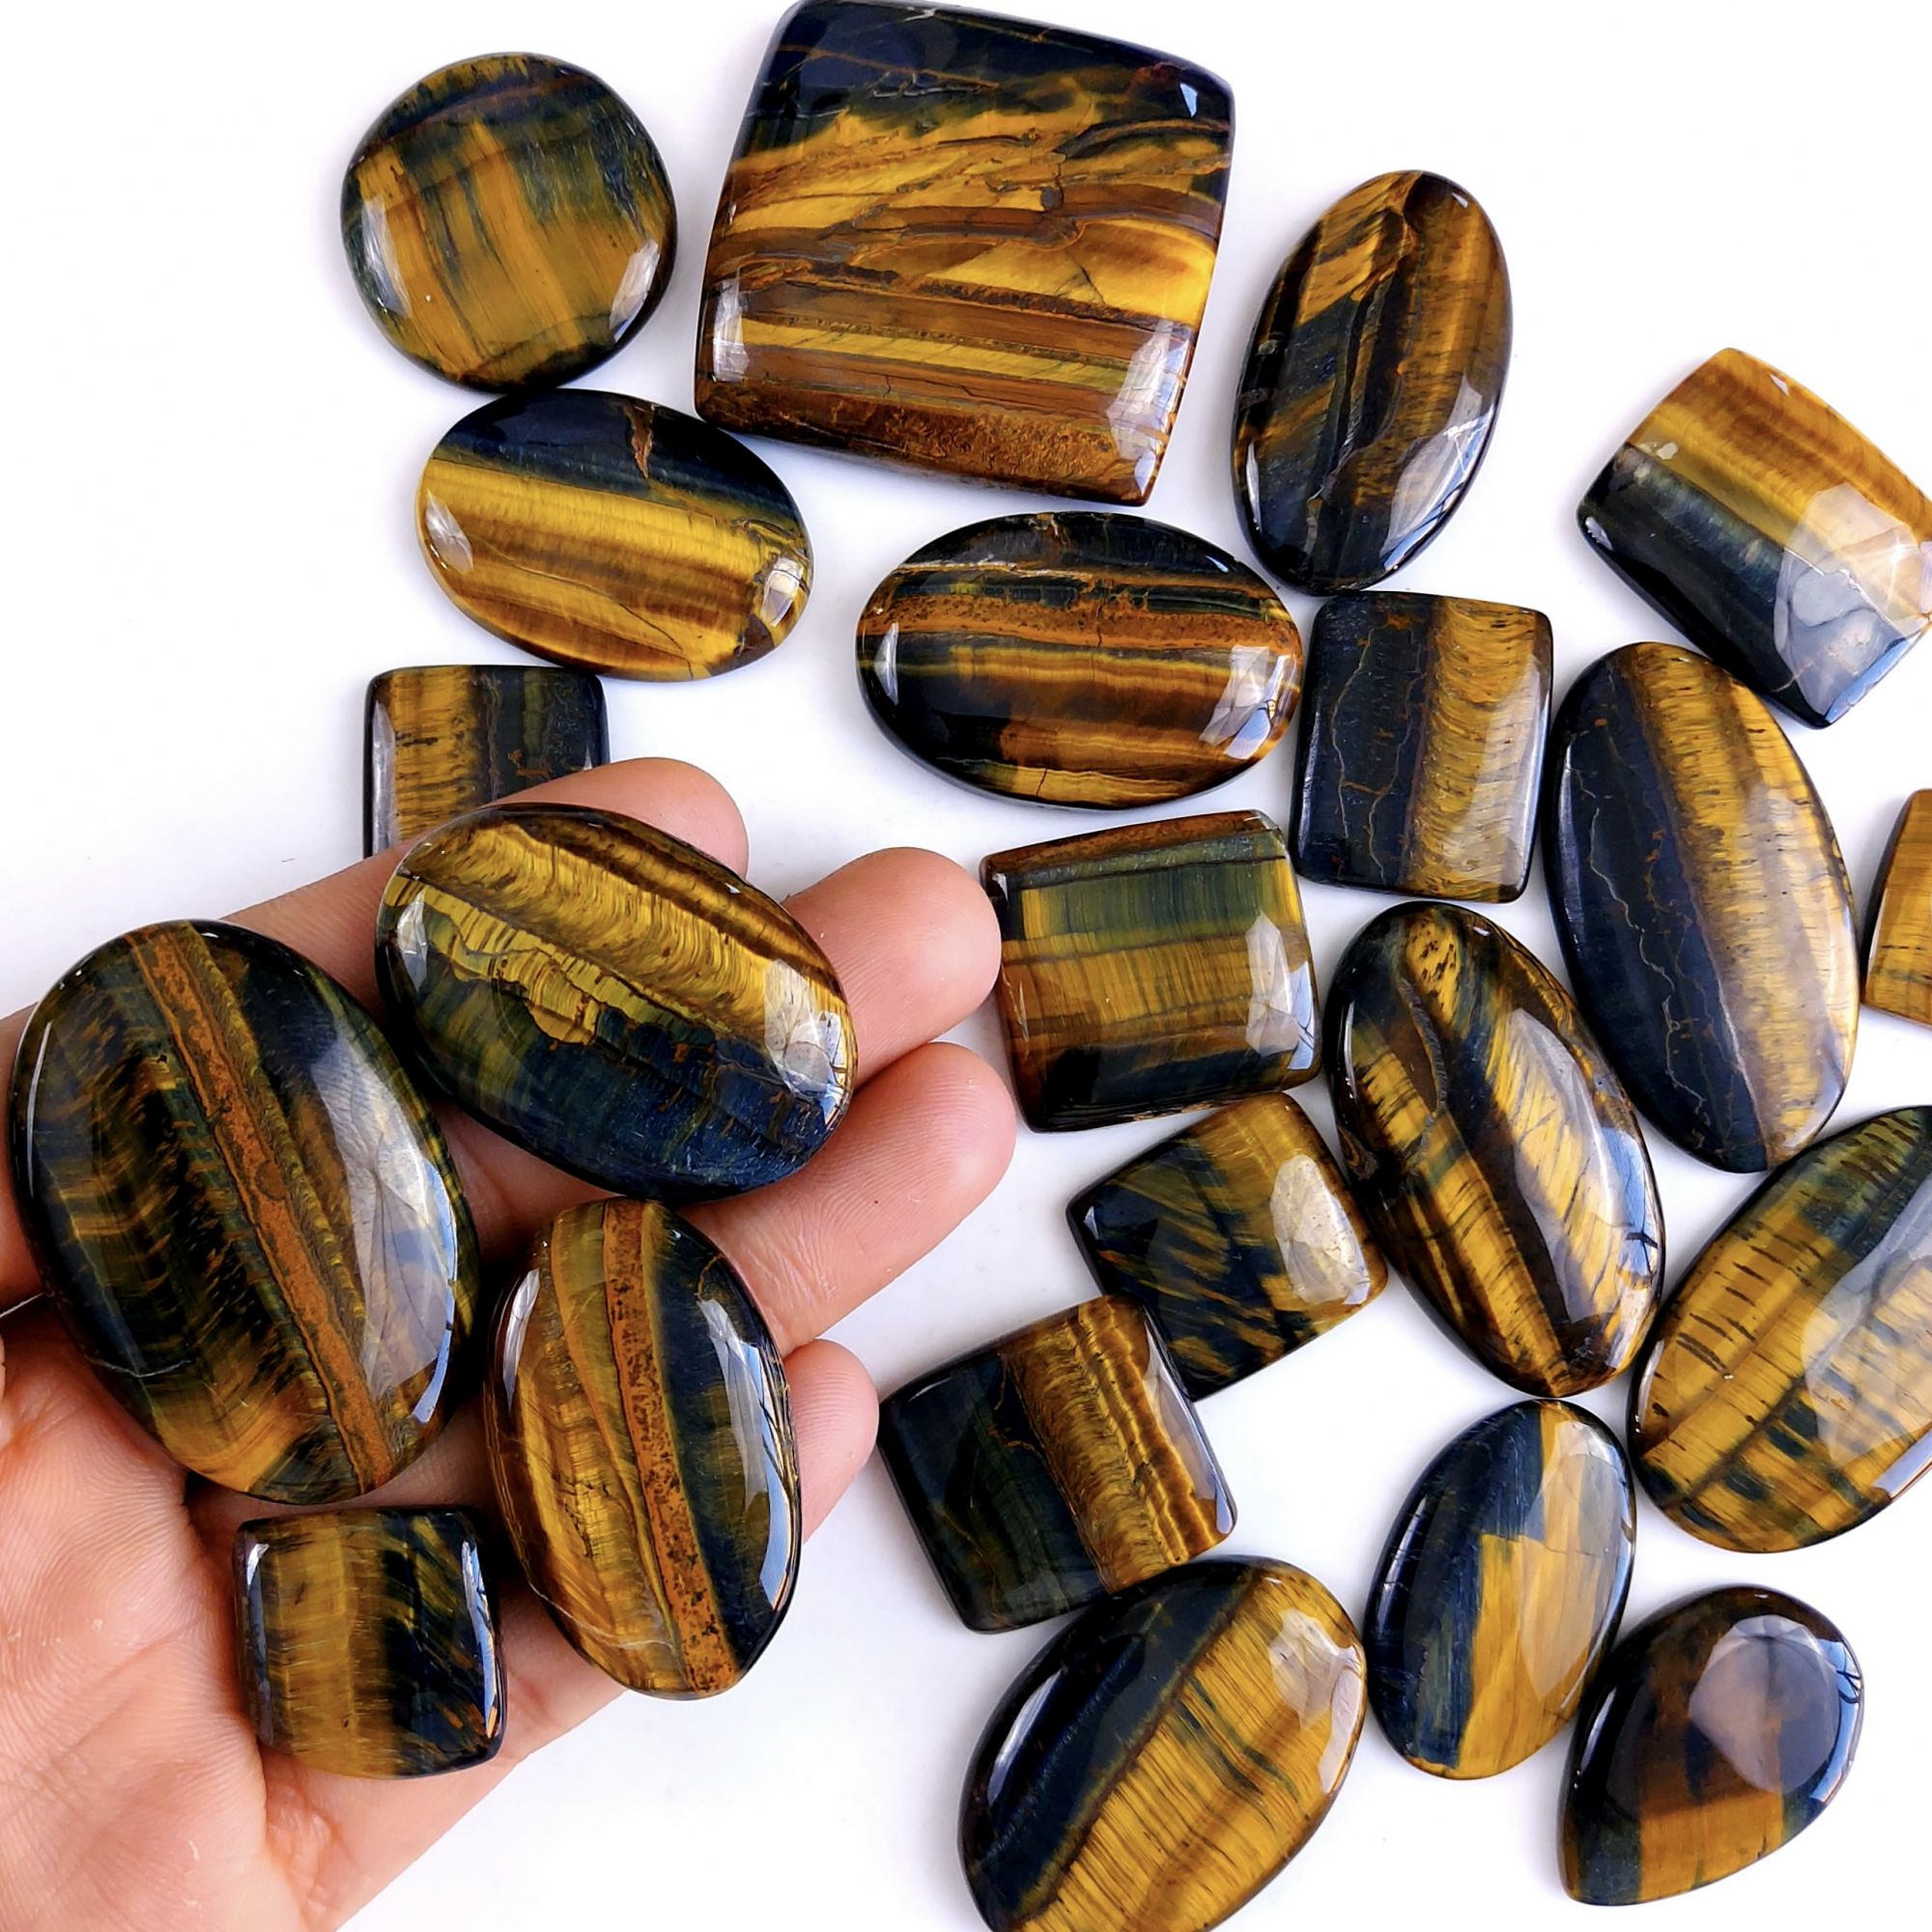 22Pcs 1217Cts Natural Tiger Eye Loose Cabochon Gemstone Lot Mix Shape and and Size for Jewelry Making 48x32 30x30mm#1301